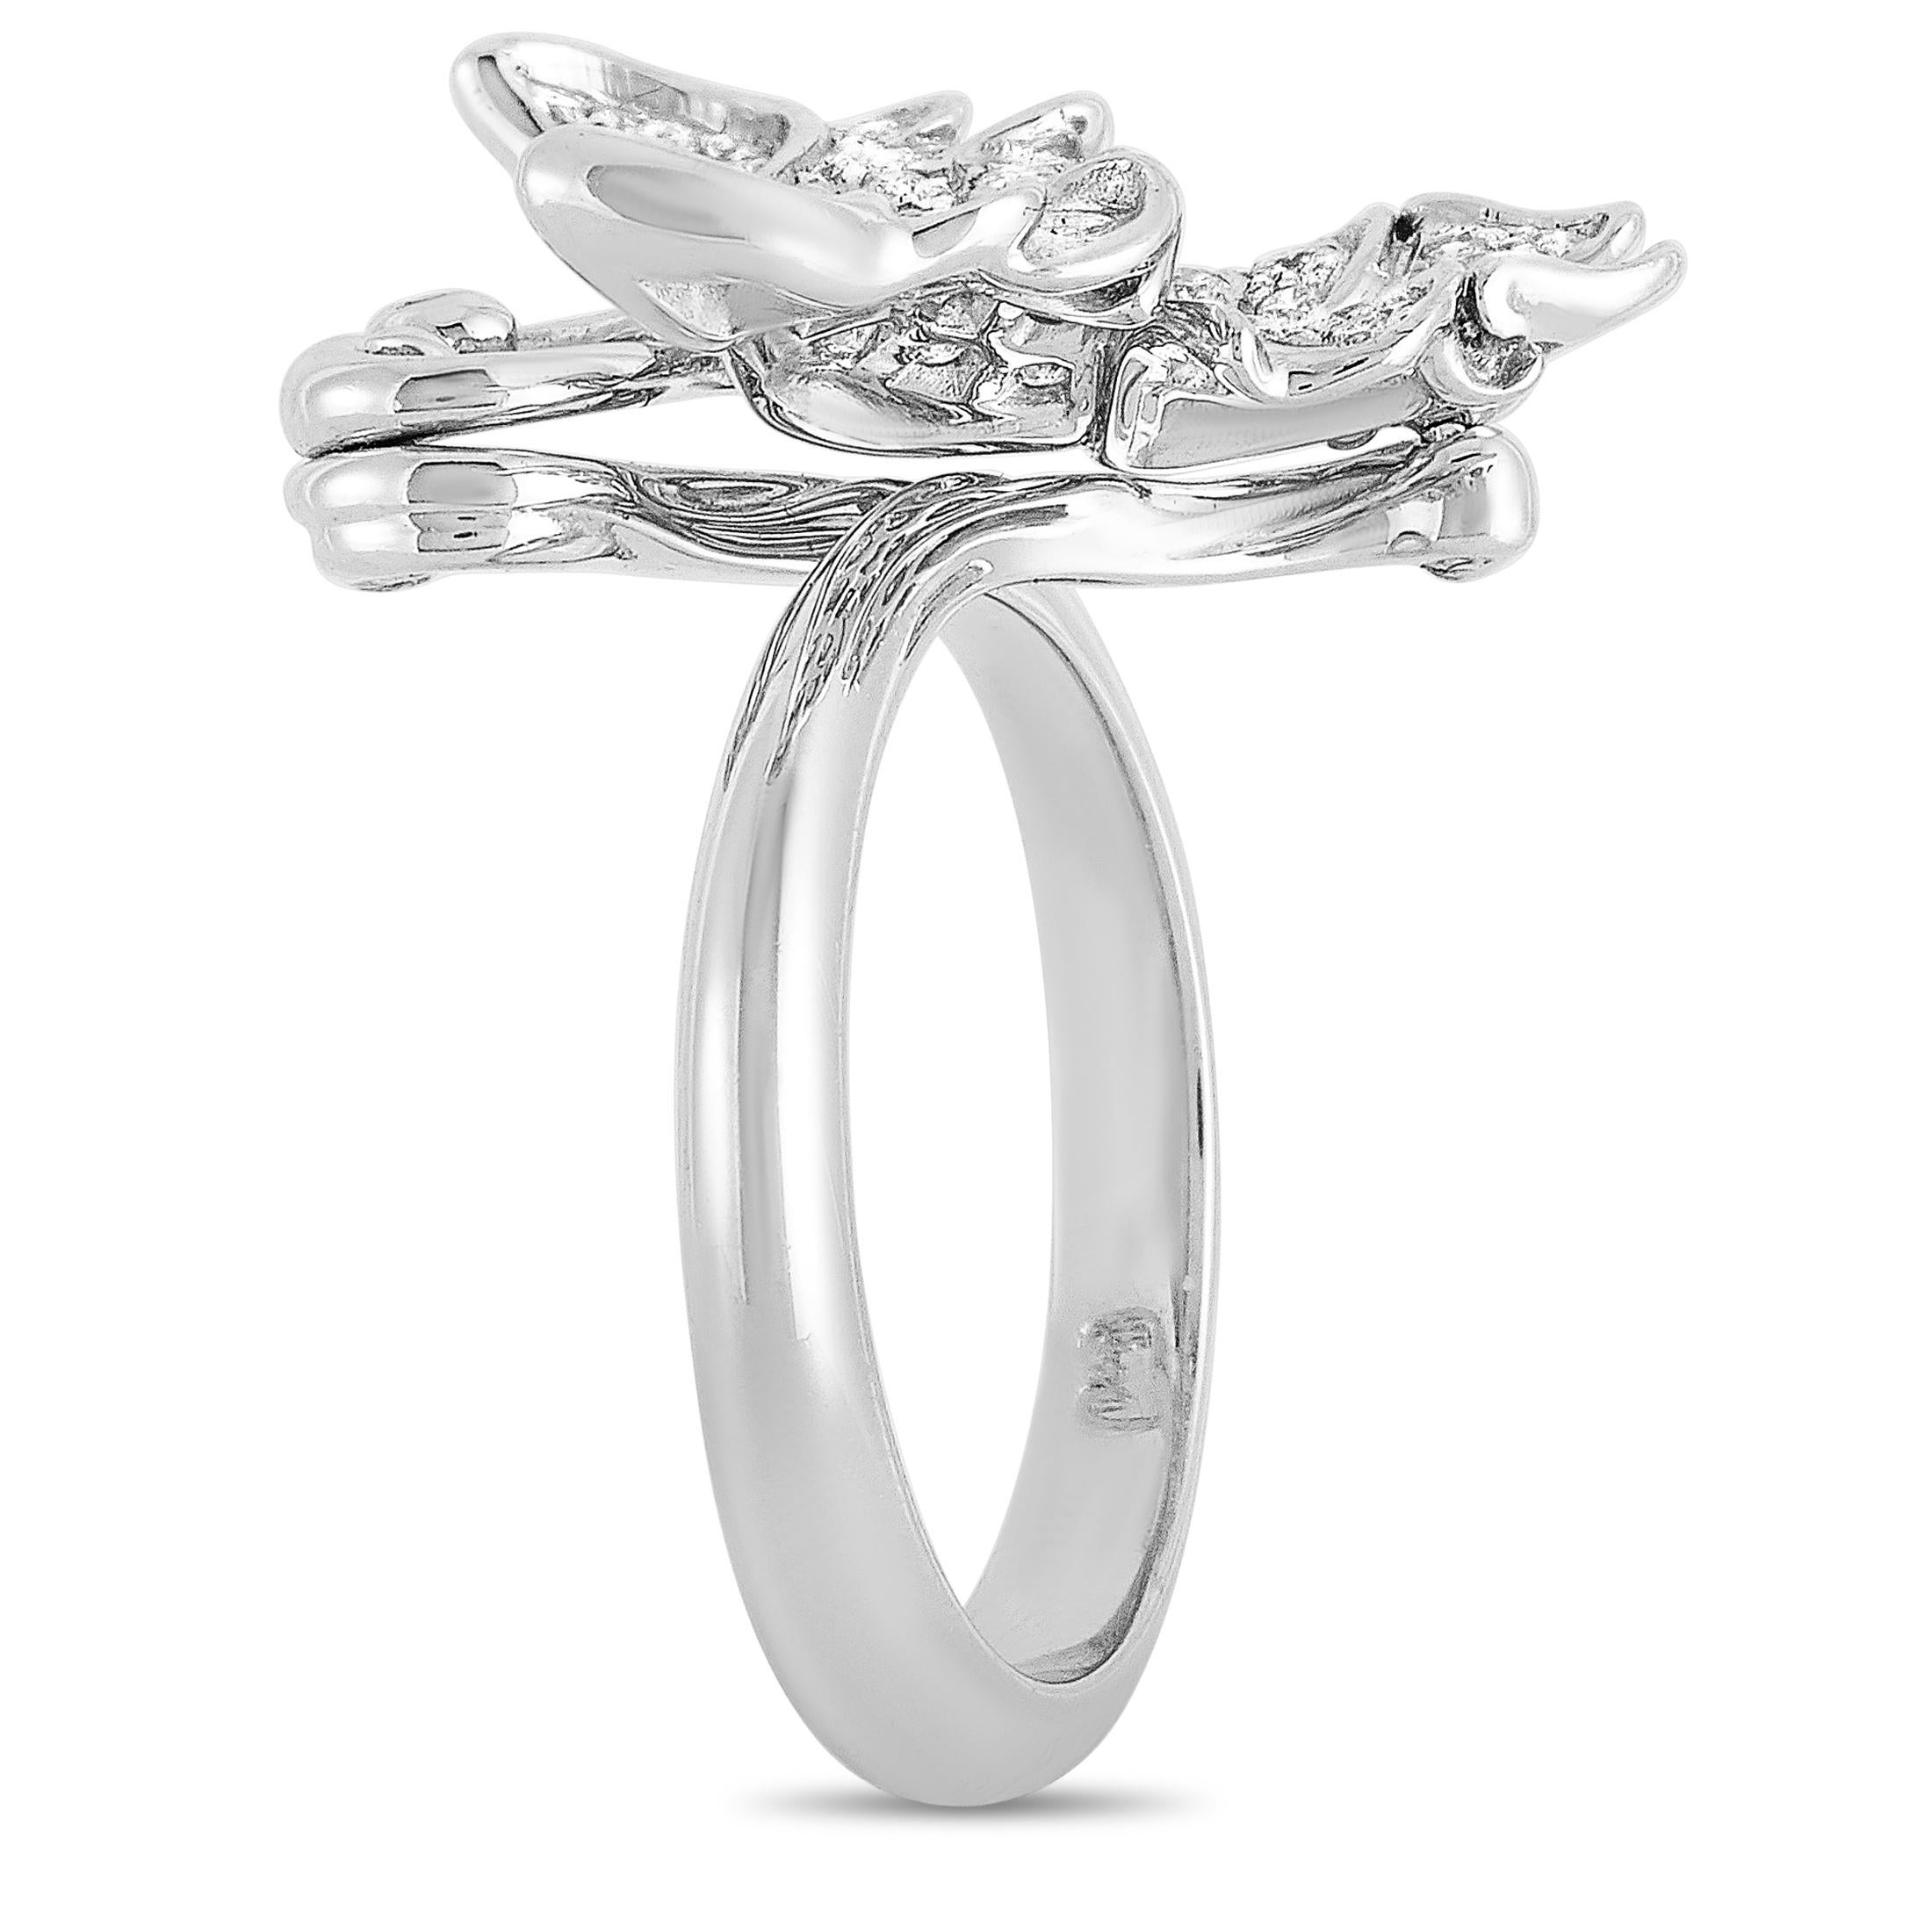 This Carrera y Carrera butterfly ring is crafted from 18K white gold and embellished with diamonds that amount to 0.37 carats. The ring weighs 8.7 grams, boasting band thickness of 3 mm and top height of 8 mm, while top dimensions measure 26 by 23